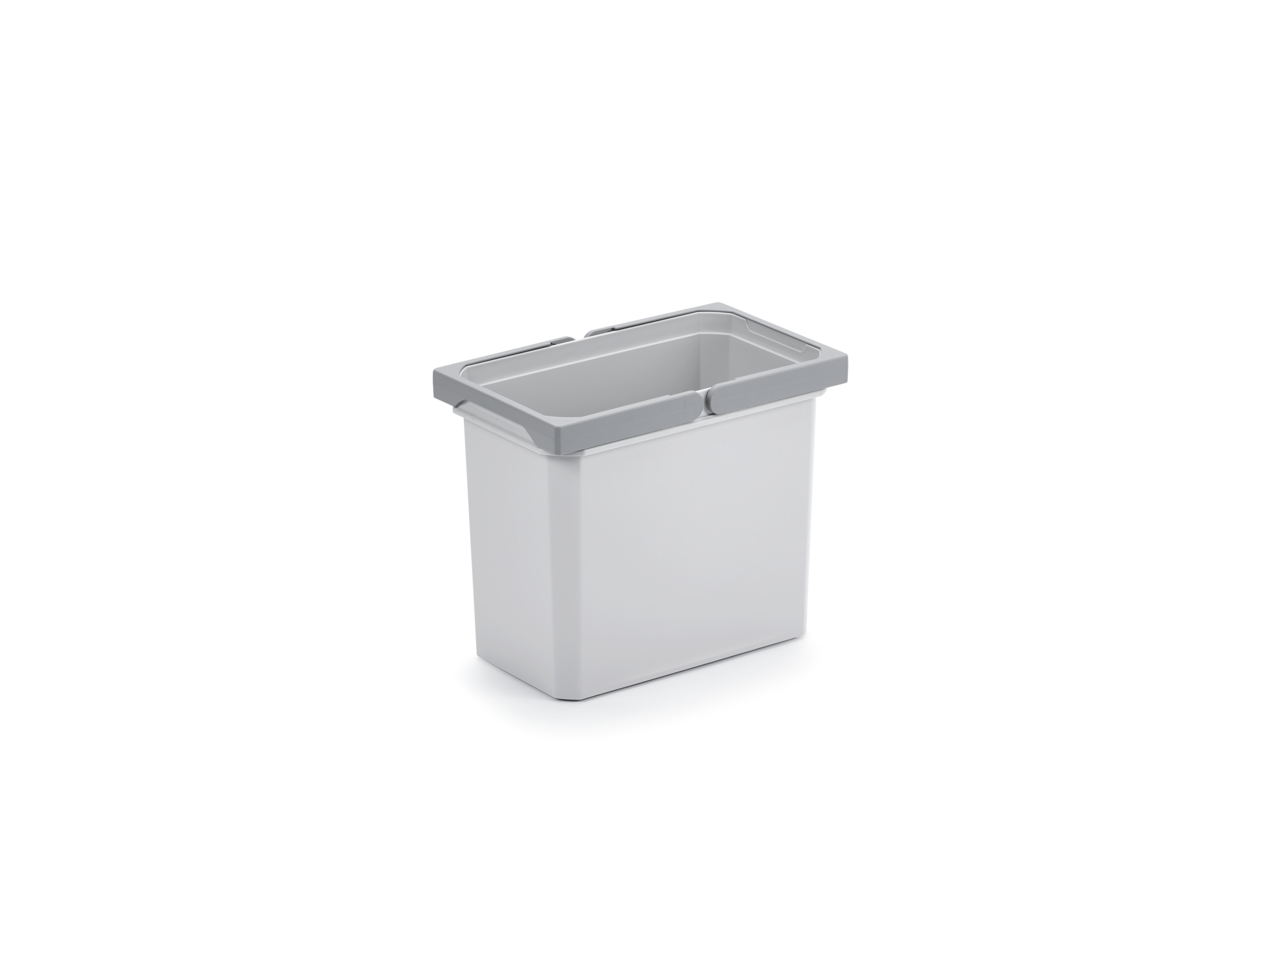  Cox® system container, light grey, 9 liters